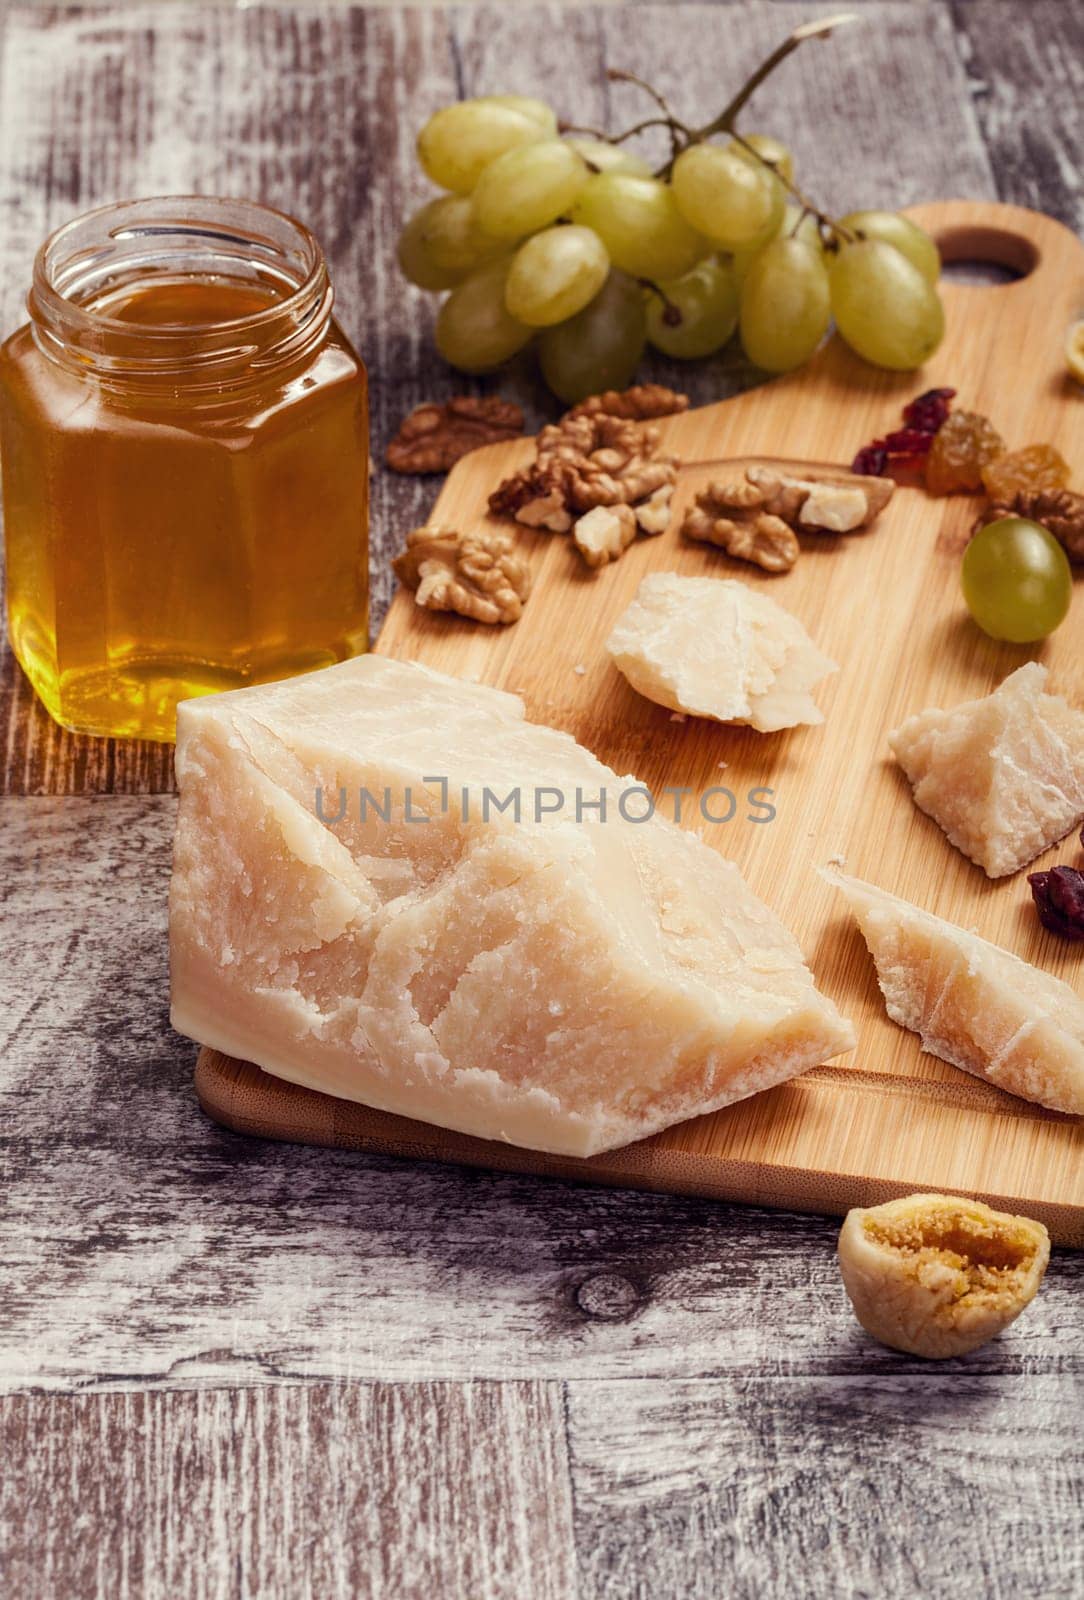 Big piece of parmesan next to nuts, grape and honey by DCStudio